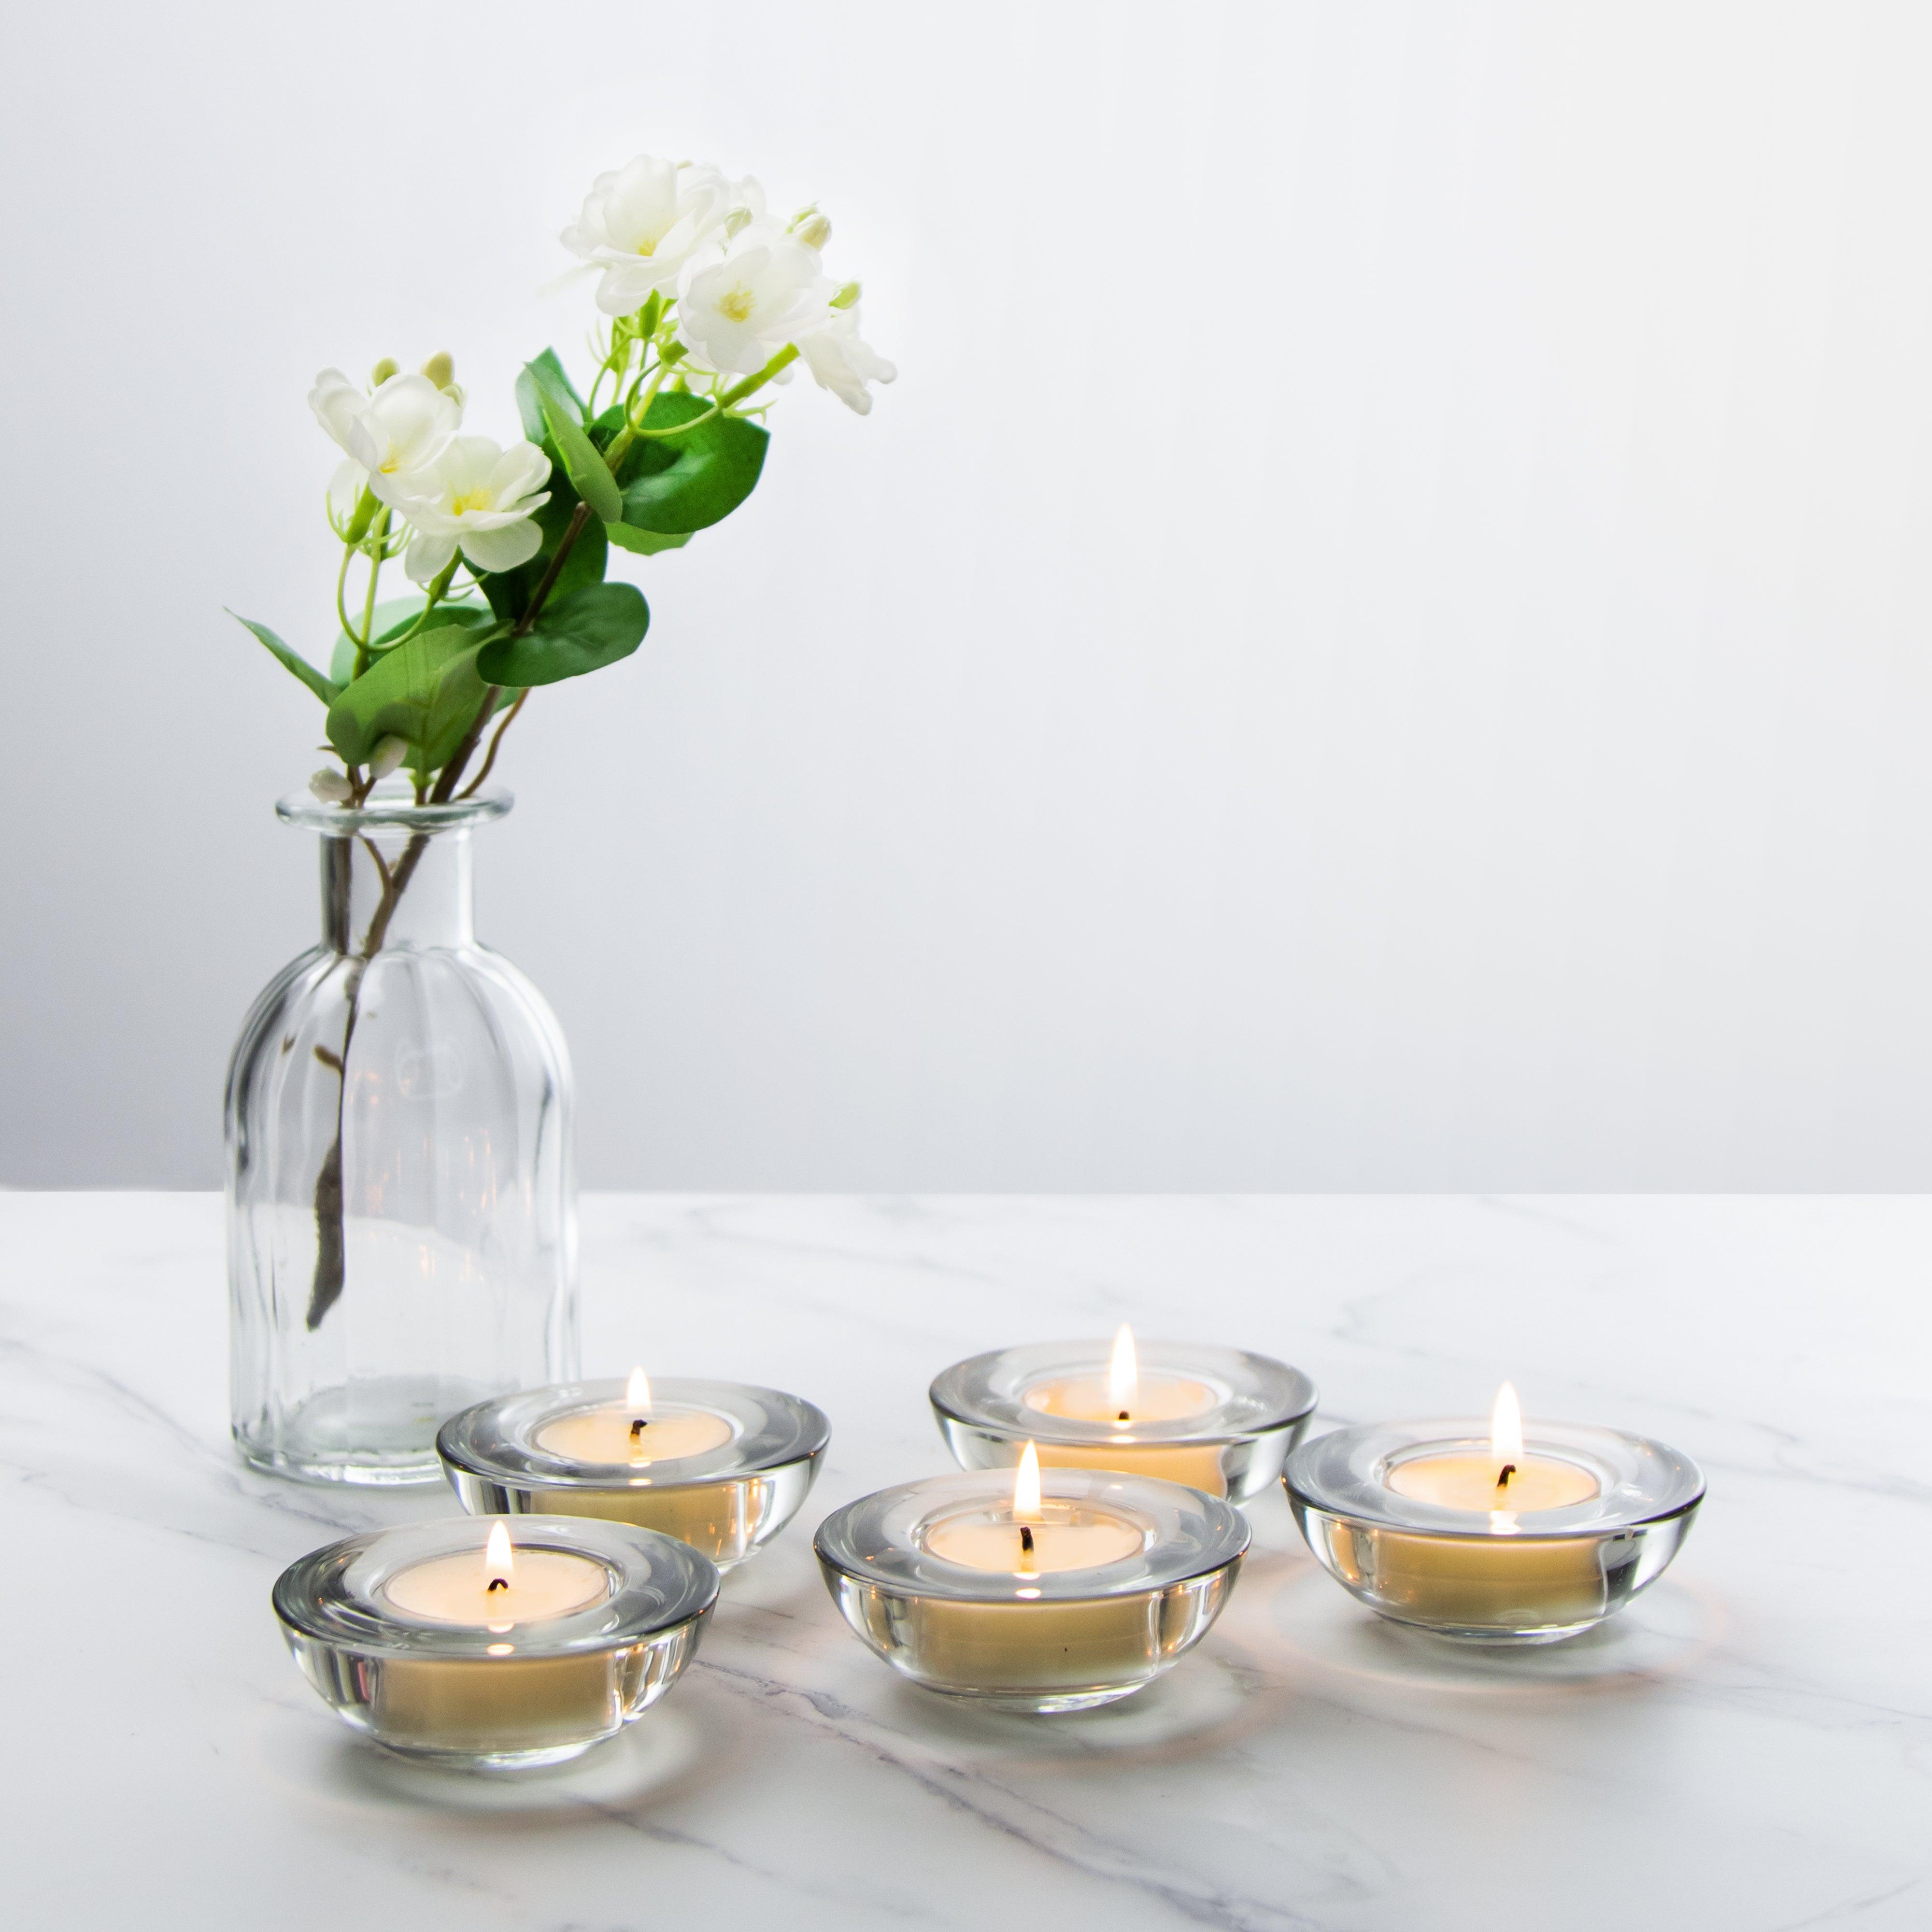 Pair of Tealight Candle Holders - VAUCLUSE